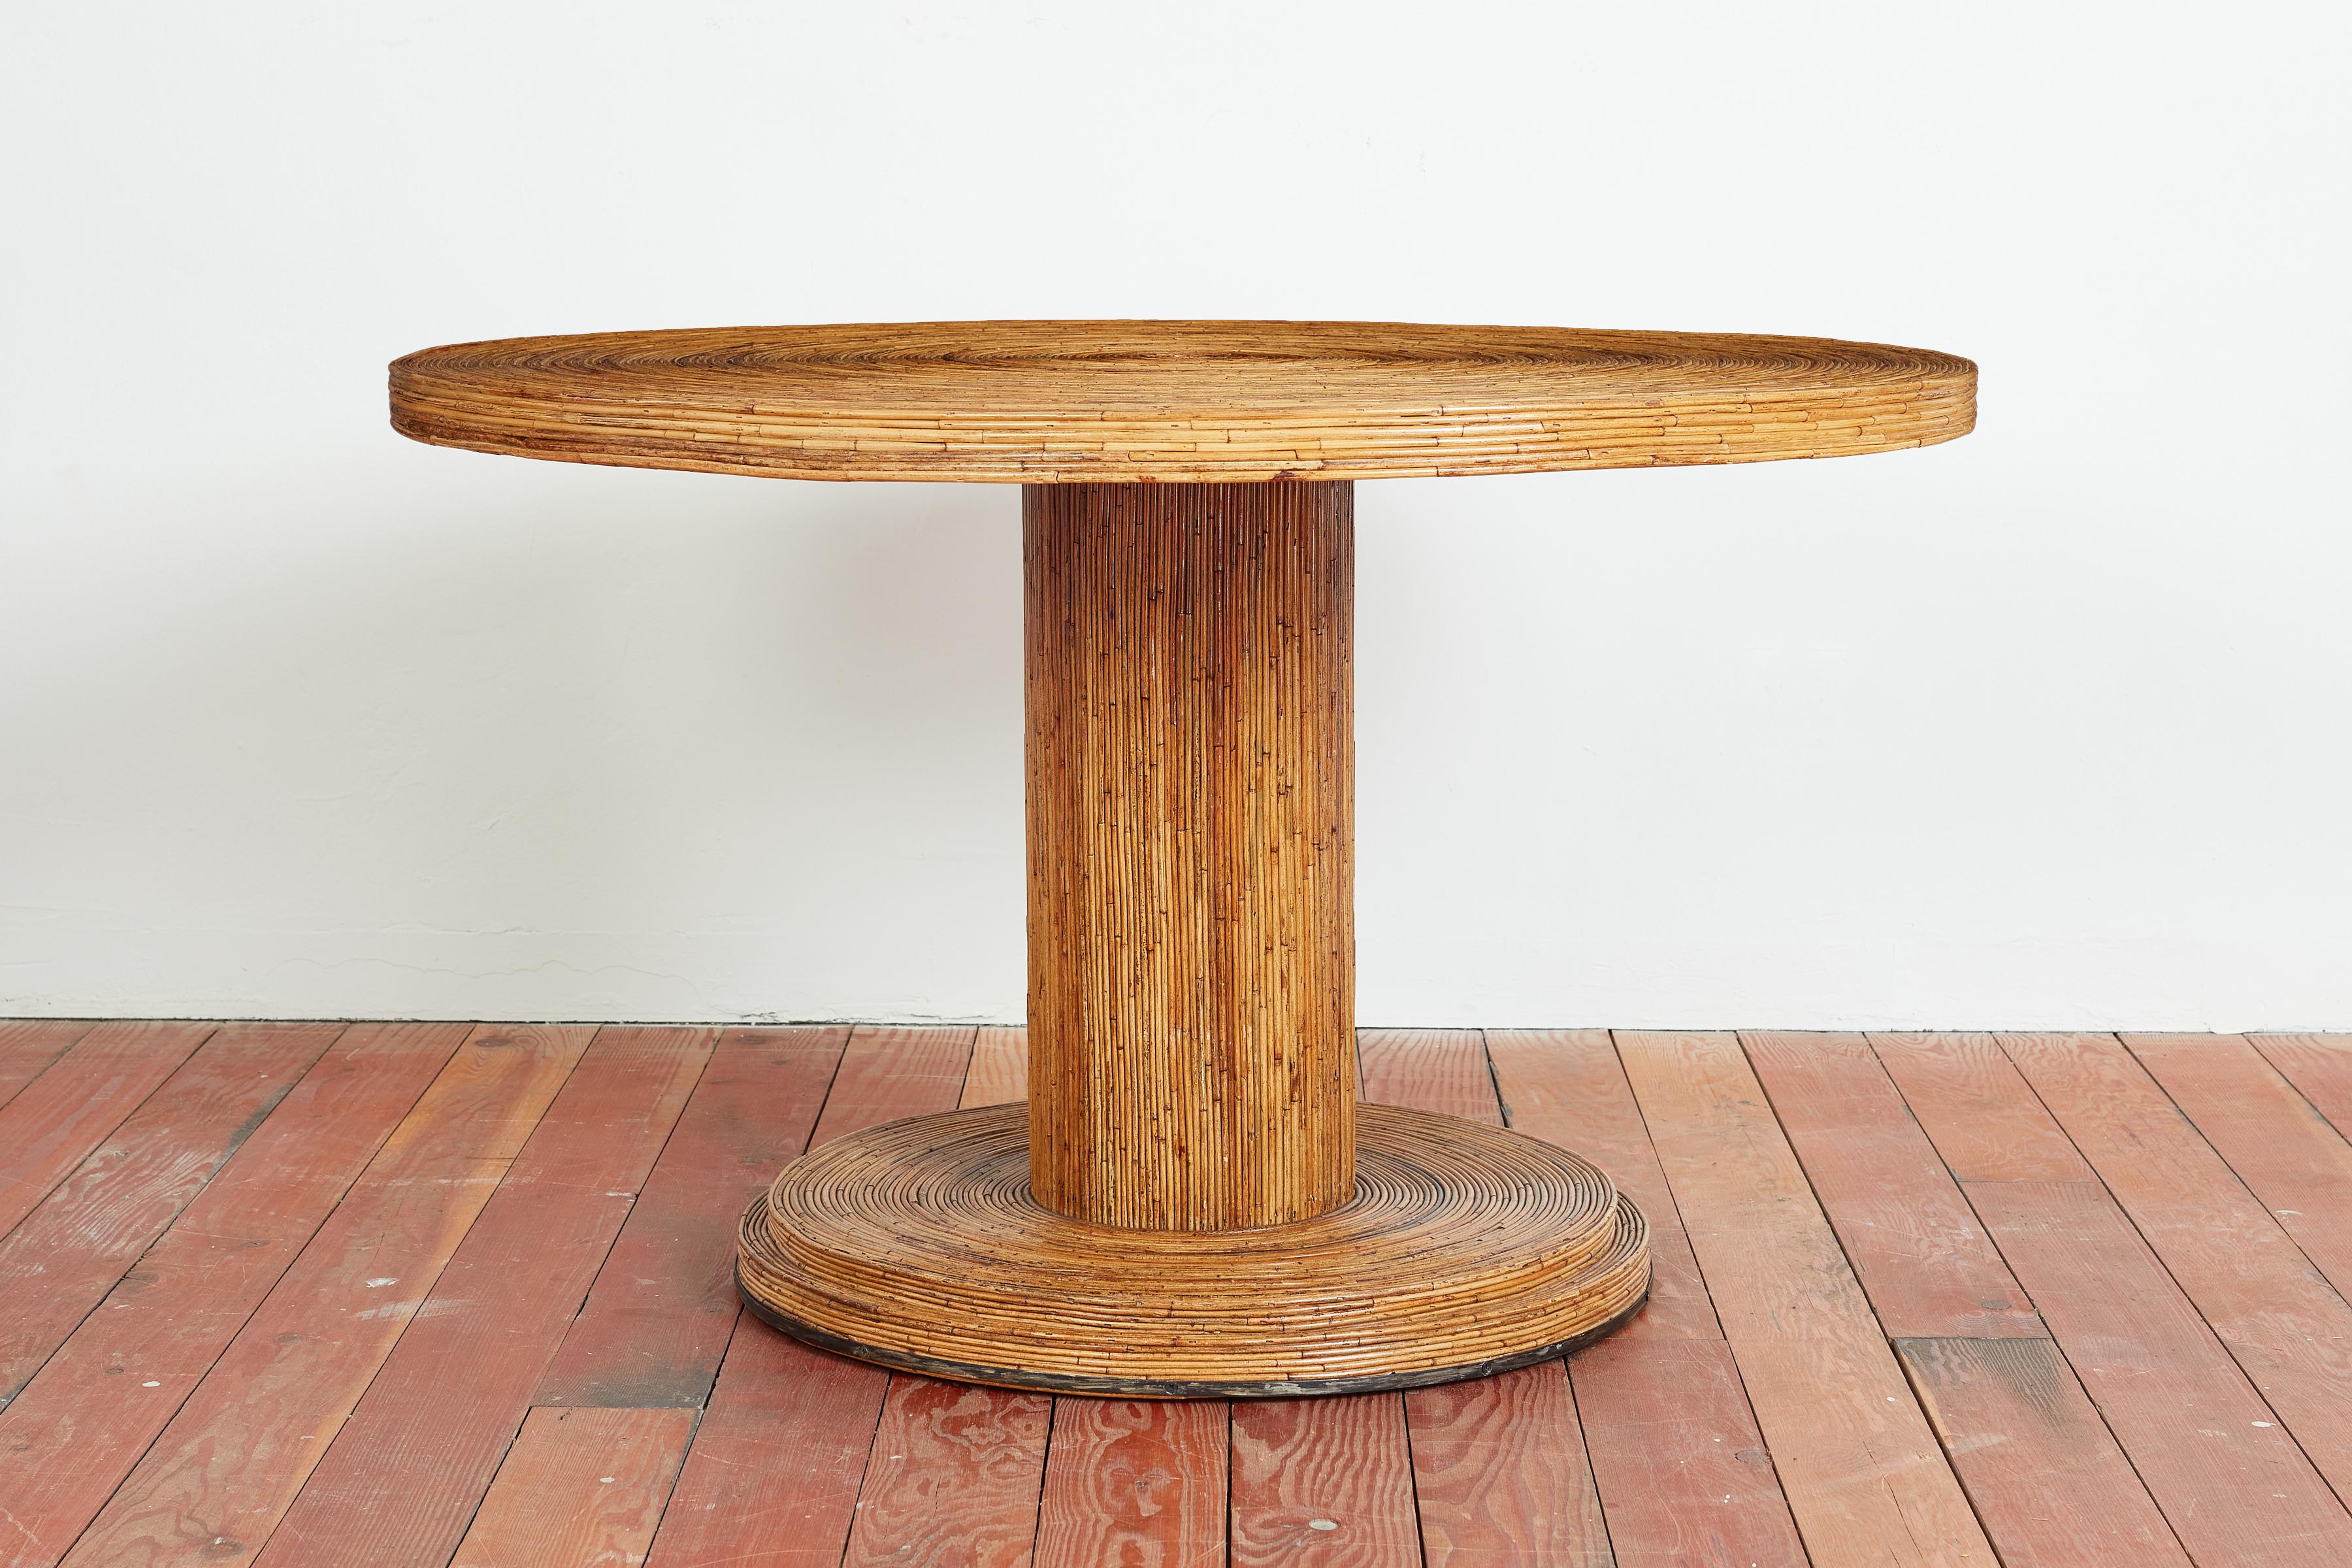 Italian bamboo dining table with concentric circled top and pedestal tulip base. 
Solid and extremely well made - and great design! 
Italy, 1950s